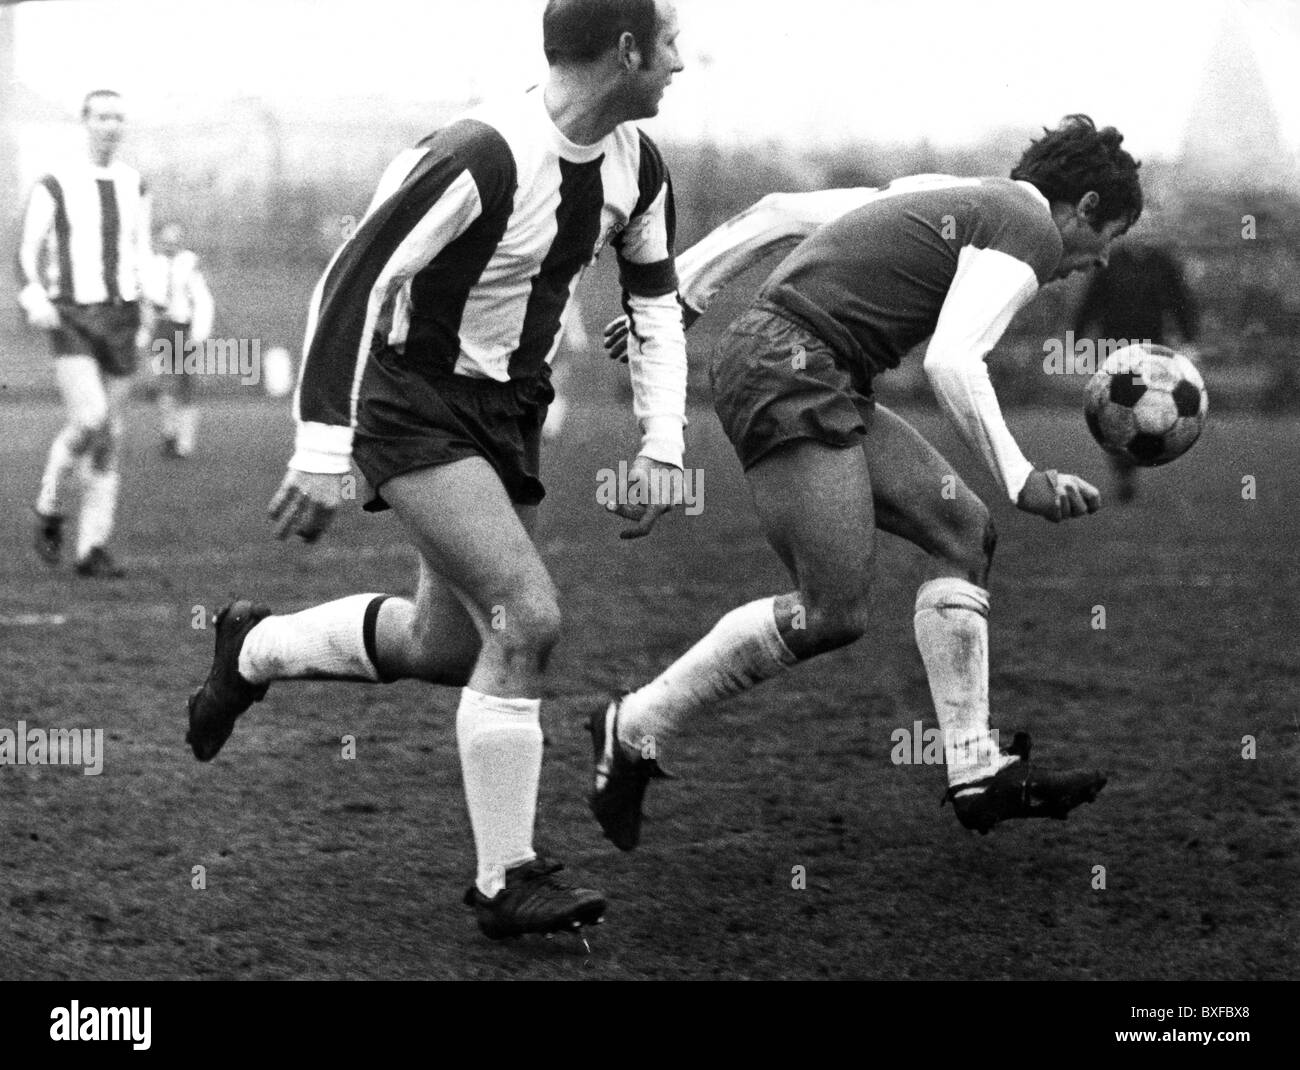 sports, soccer / football, match, FC St. Pauli against Fortuna Duesseldorf, players Weschke and Pokropp, 23.11.1968, Additional-Rights-Clearences-Not Available Stock Photo